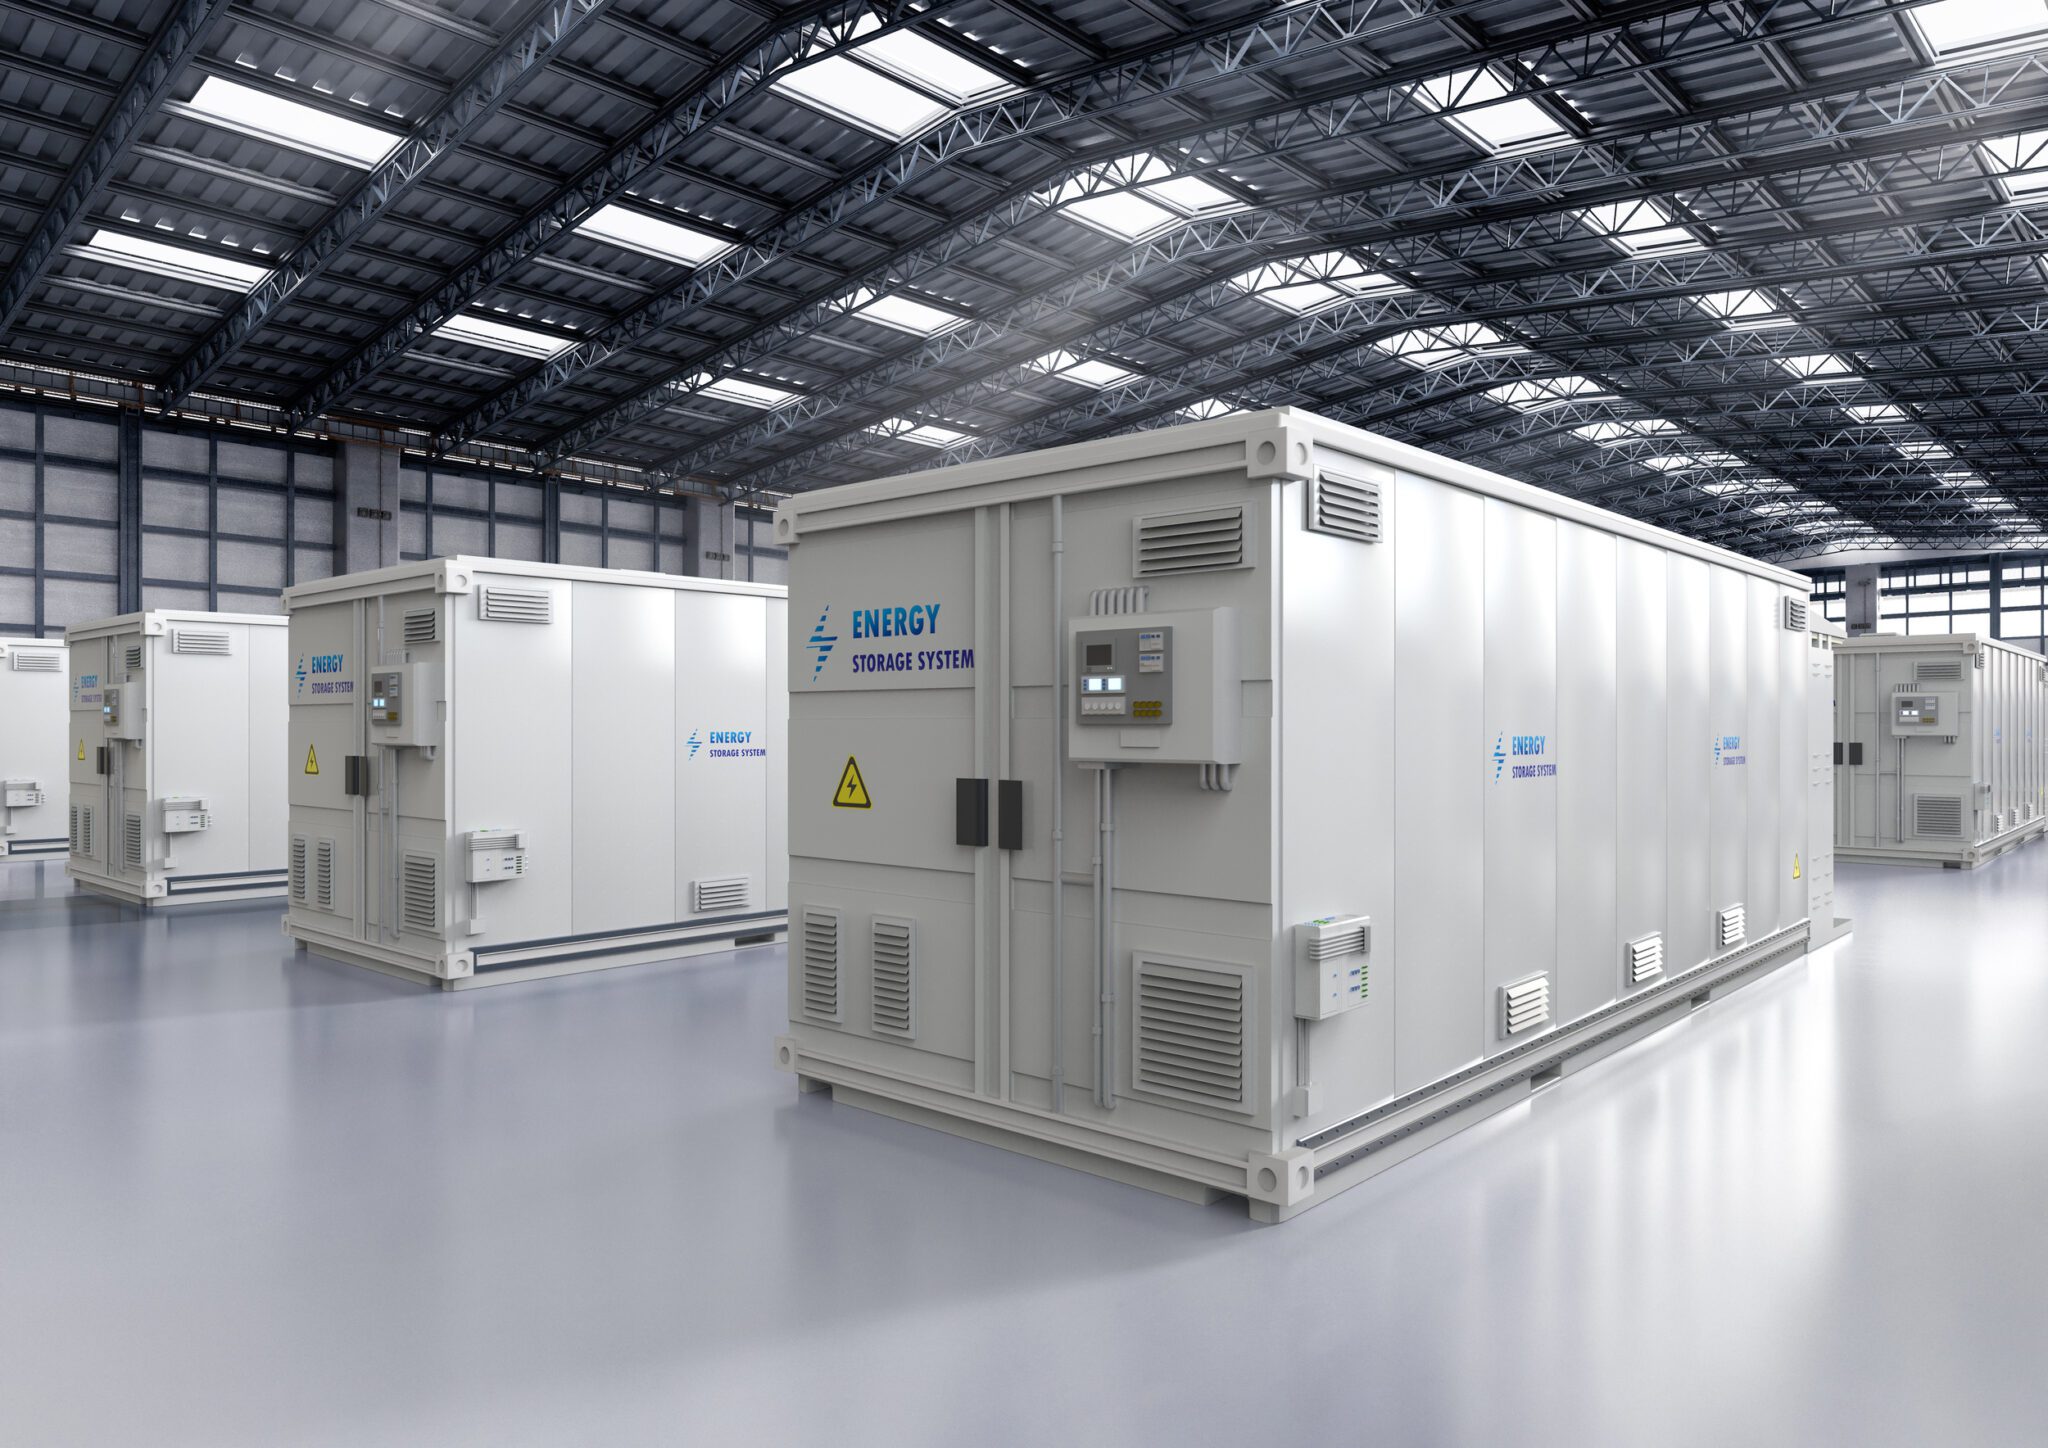 Rendering of an energy storage system or battery storage system containers inside a factory or warehouse.